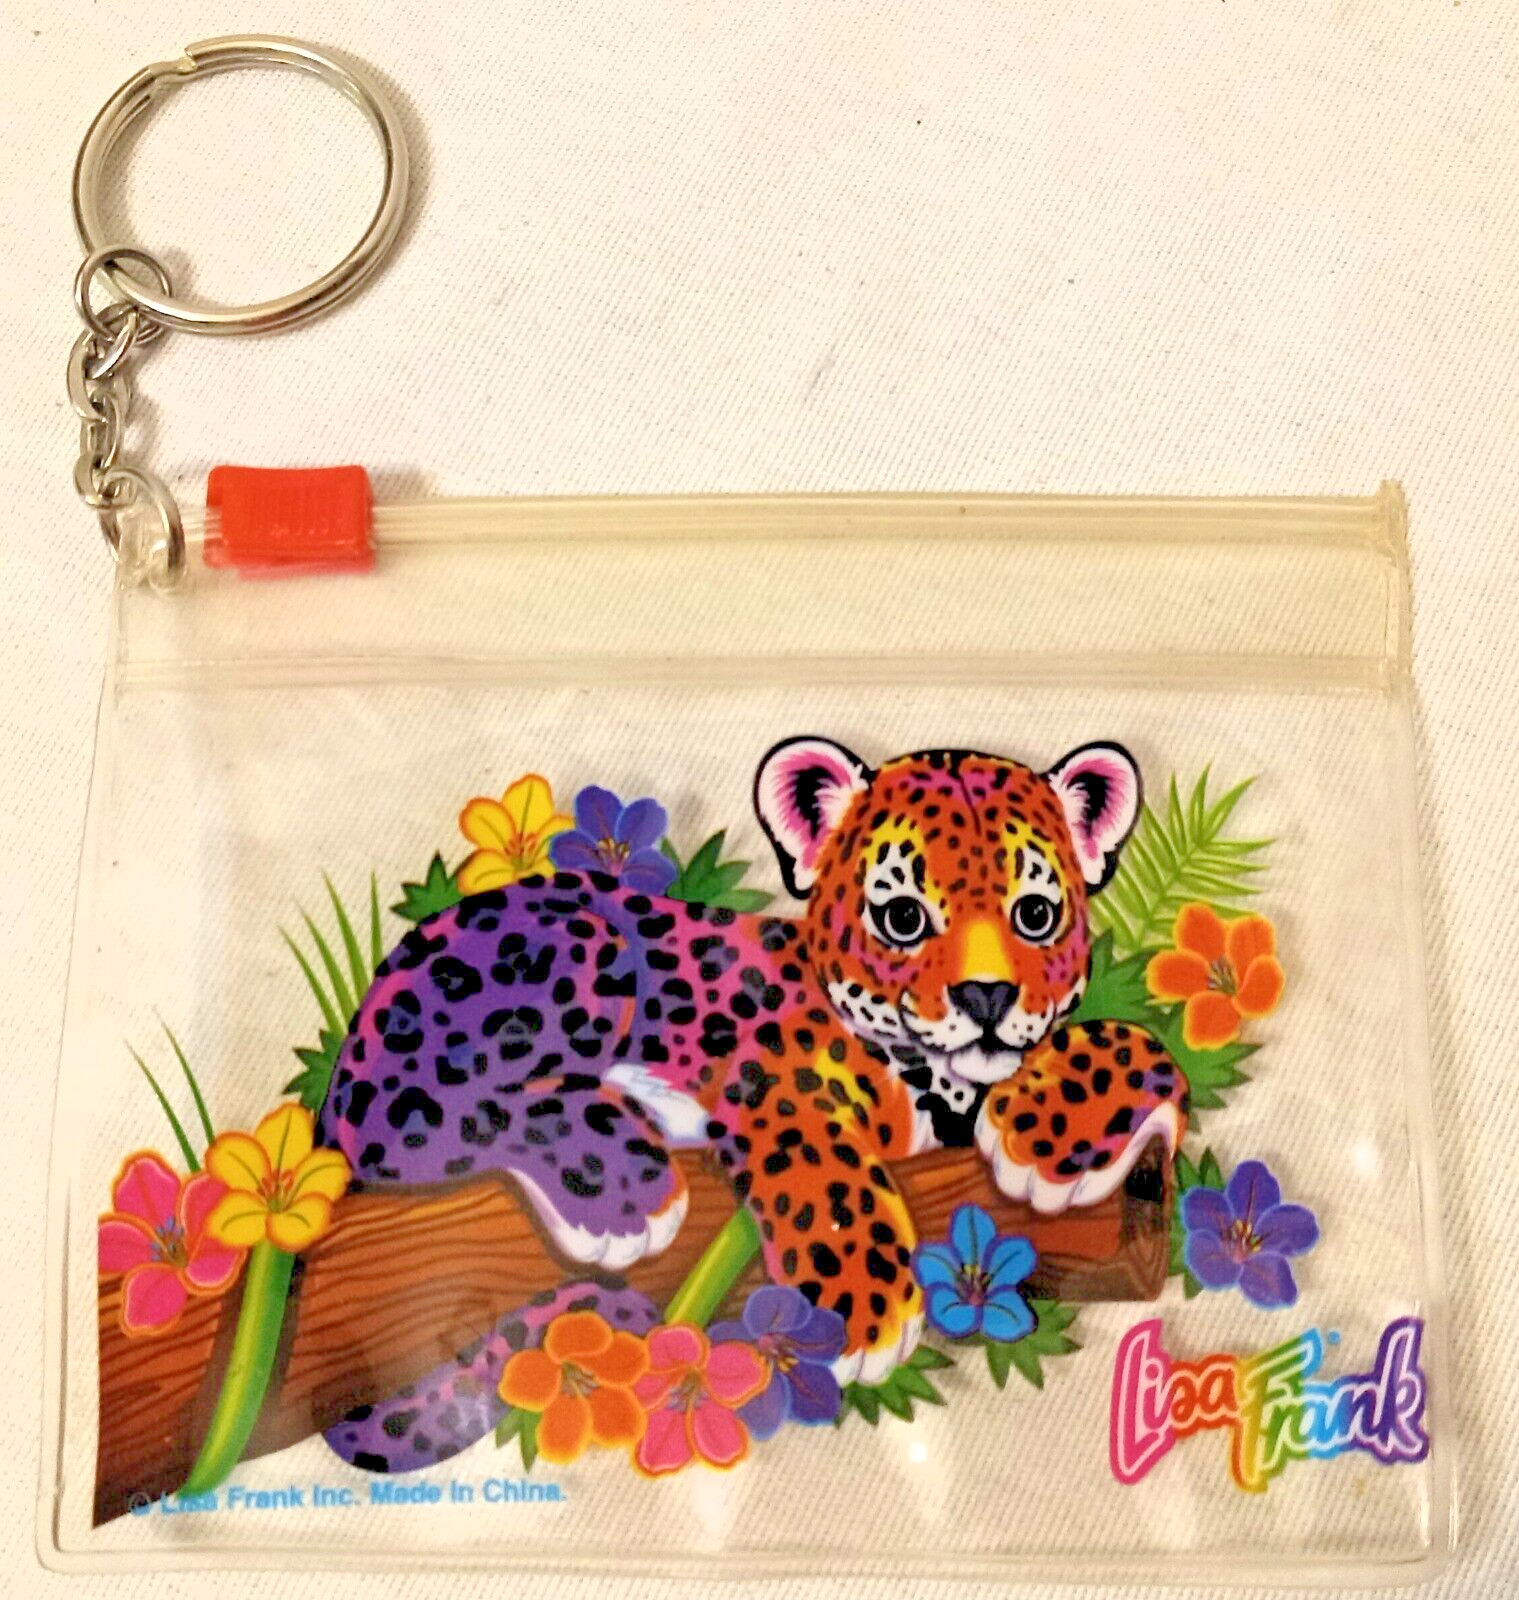 Vintage Lisa Frank Lepoard Keychain Coin Pouch in Near Mint Condition